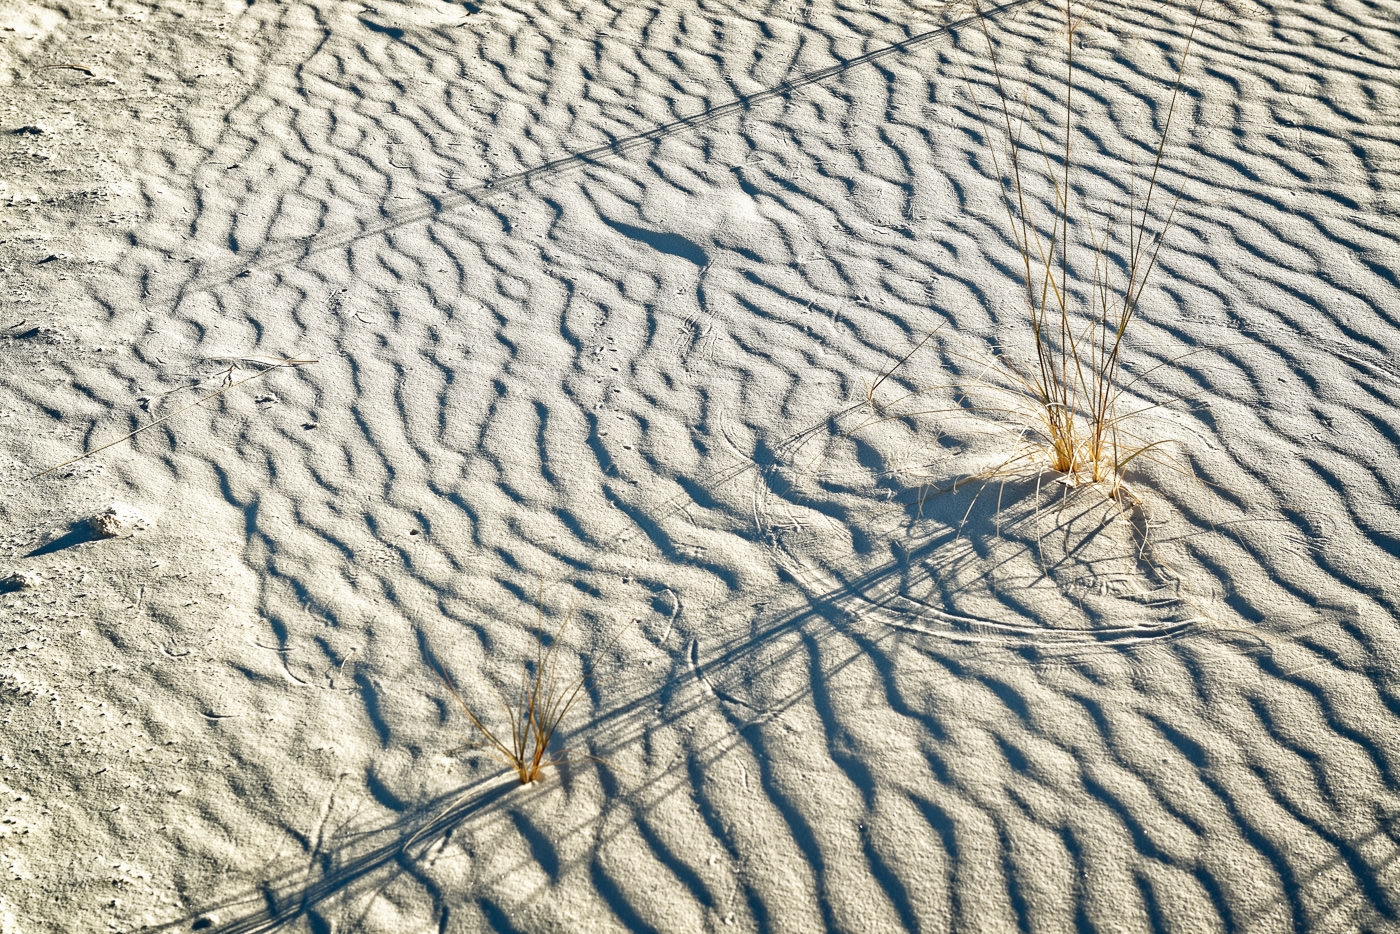 Sand Patterns and Shadows by John McGarry